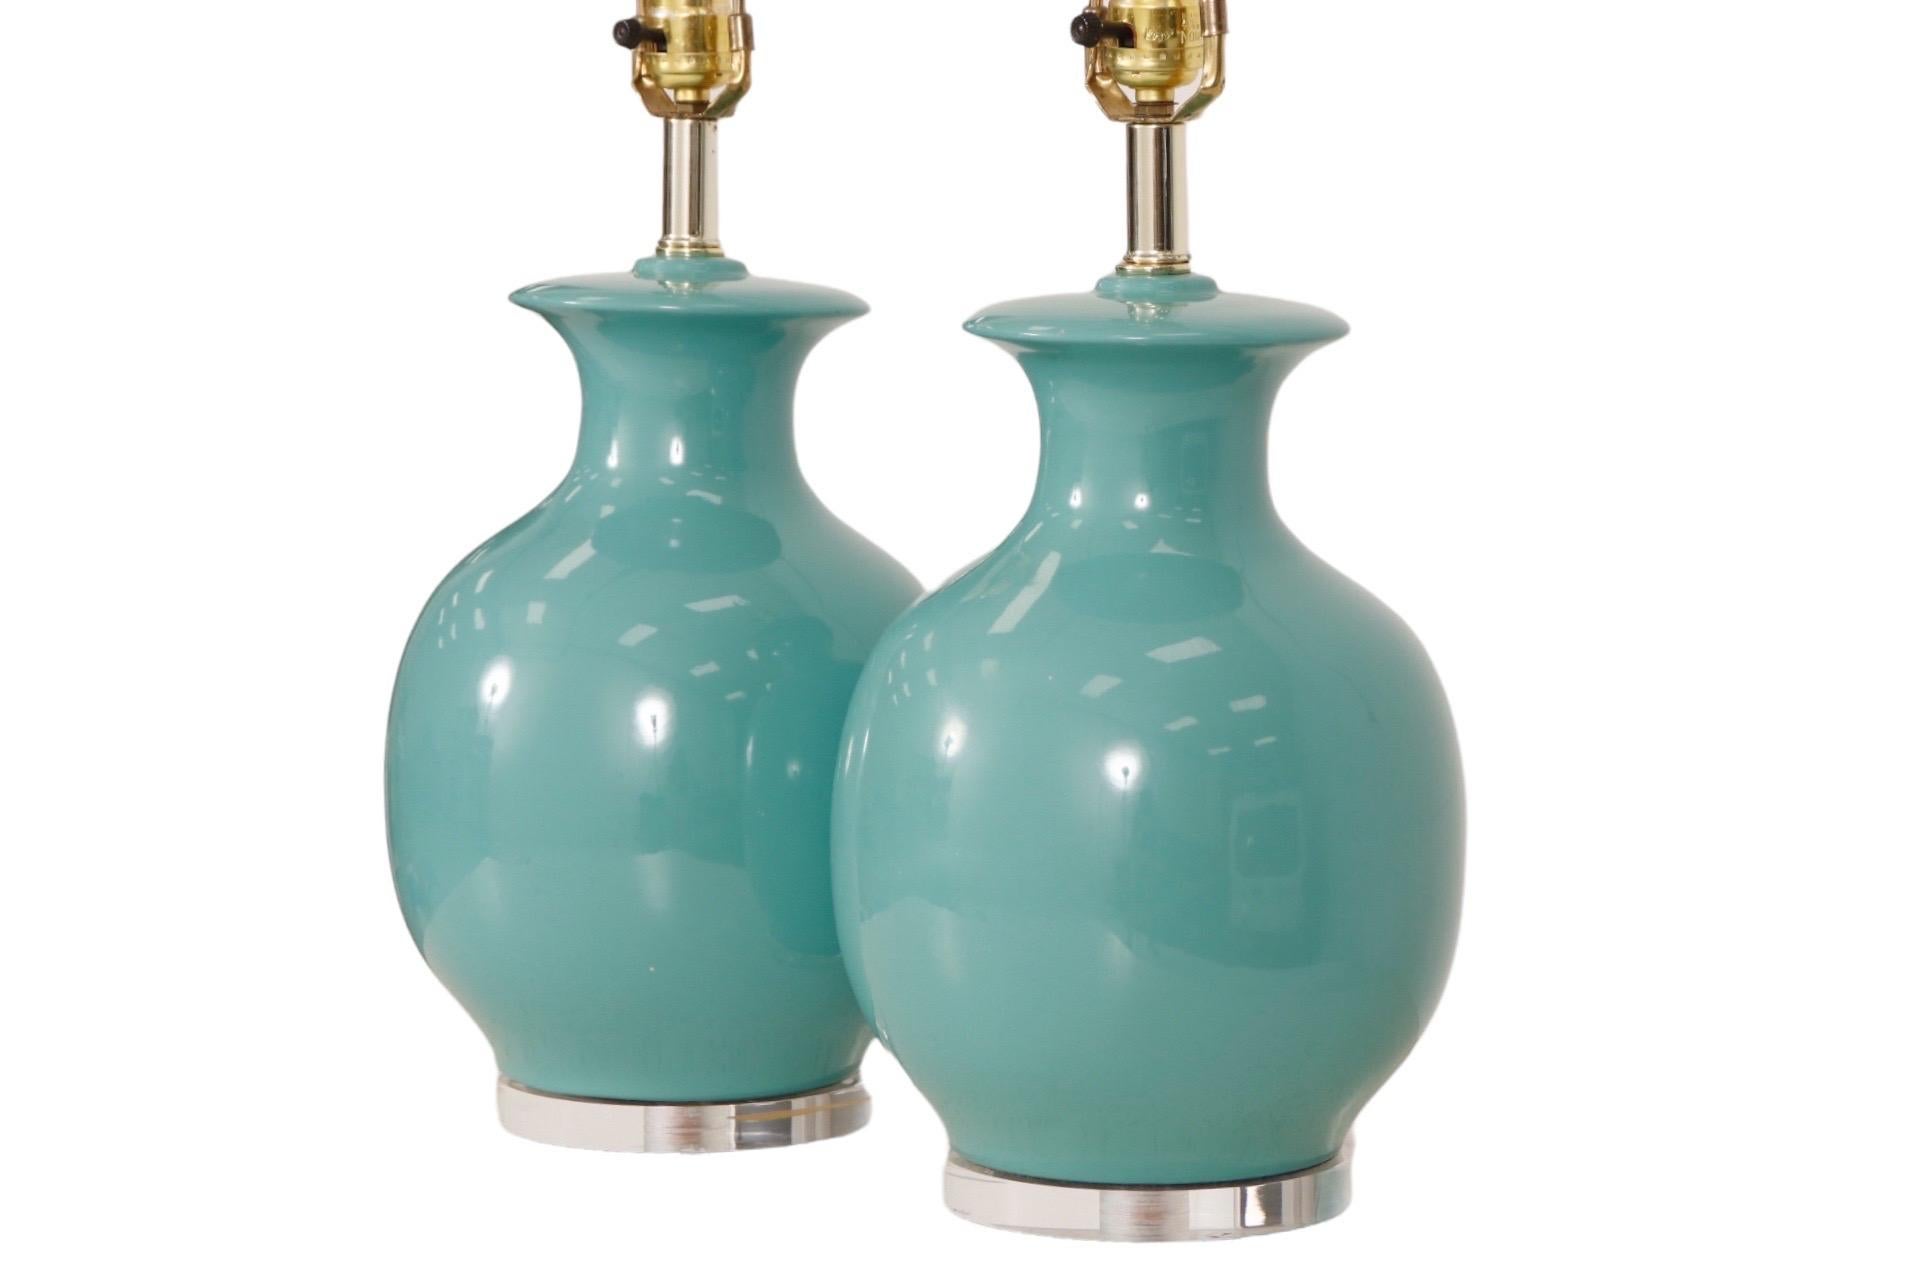 A pair of Mid Century Modern ceramic and lucite table lamps. Urn shaped bodies are Tiffany blue above thick round lucite bases. Maker's label underneath reads “US Homes of Florida Rutenburg Homes Division”. Each lamp measures 18.5”H to the top of